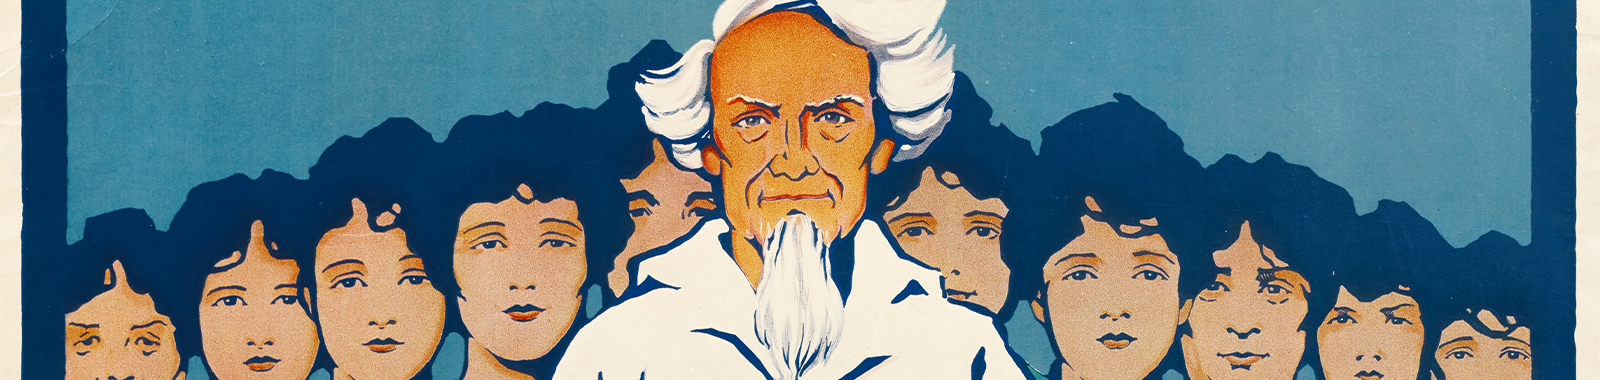 detail of color US propaganda poster 2910 showing the heads of Uncle Sam at center flanked on either side by women